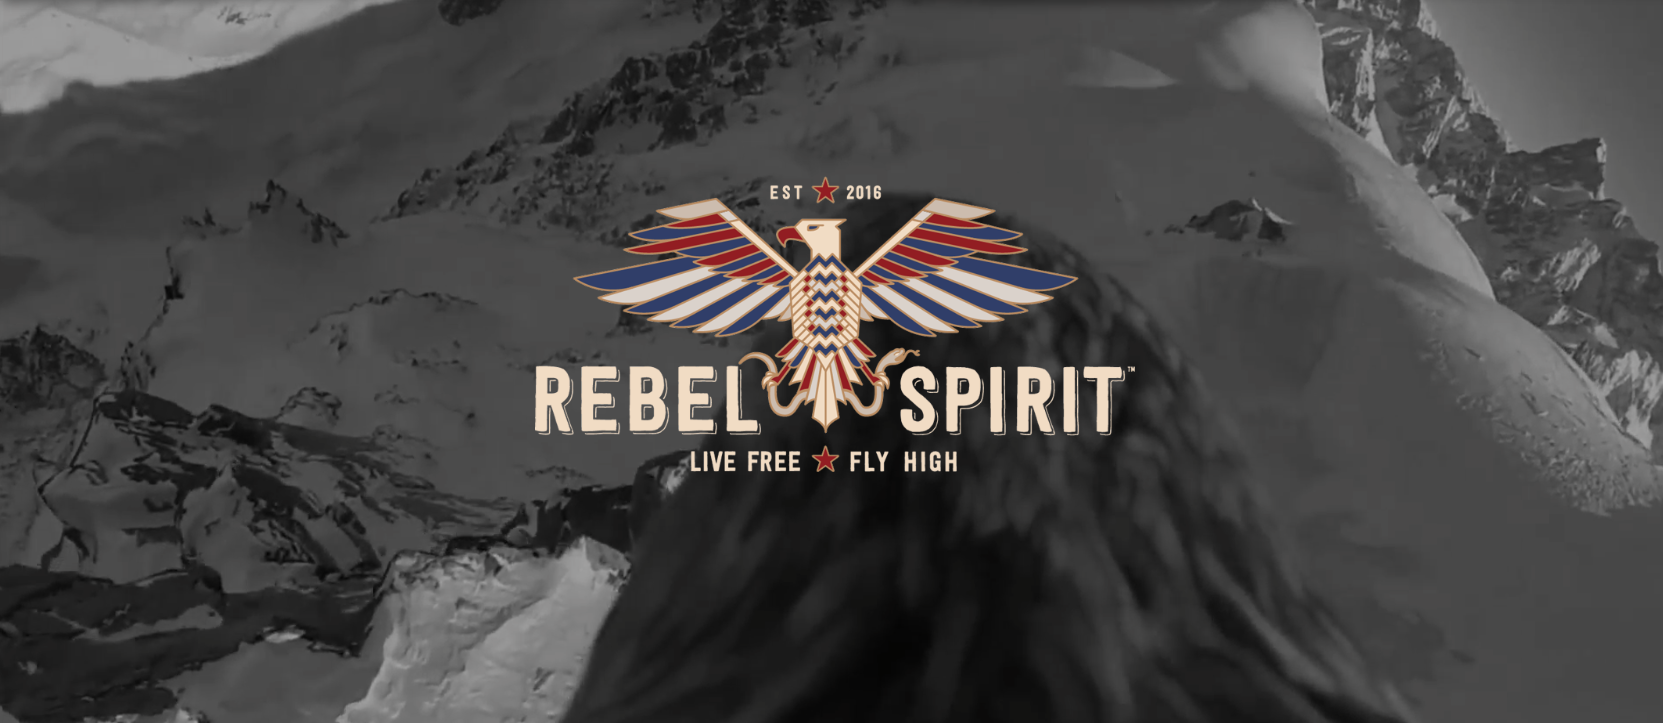 Rebel Spirits dropped off NEW JOINT PACKS!